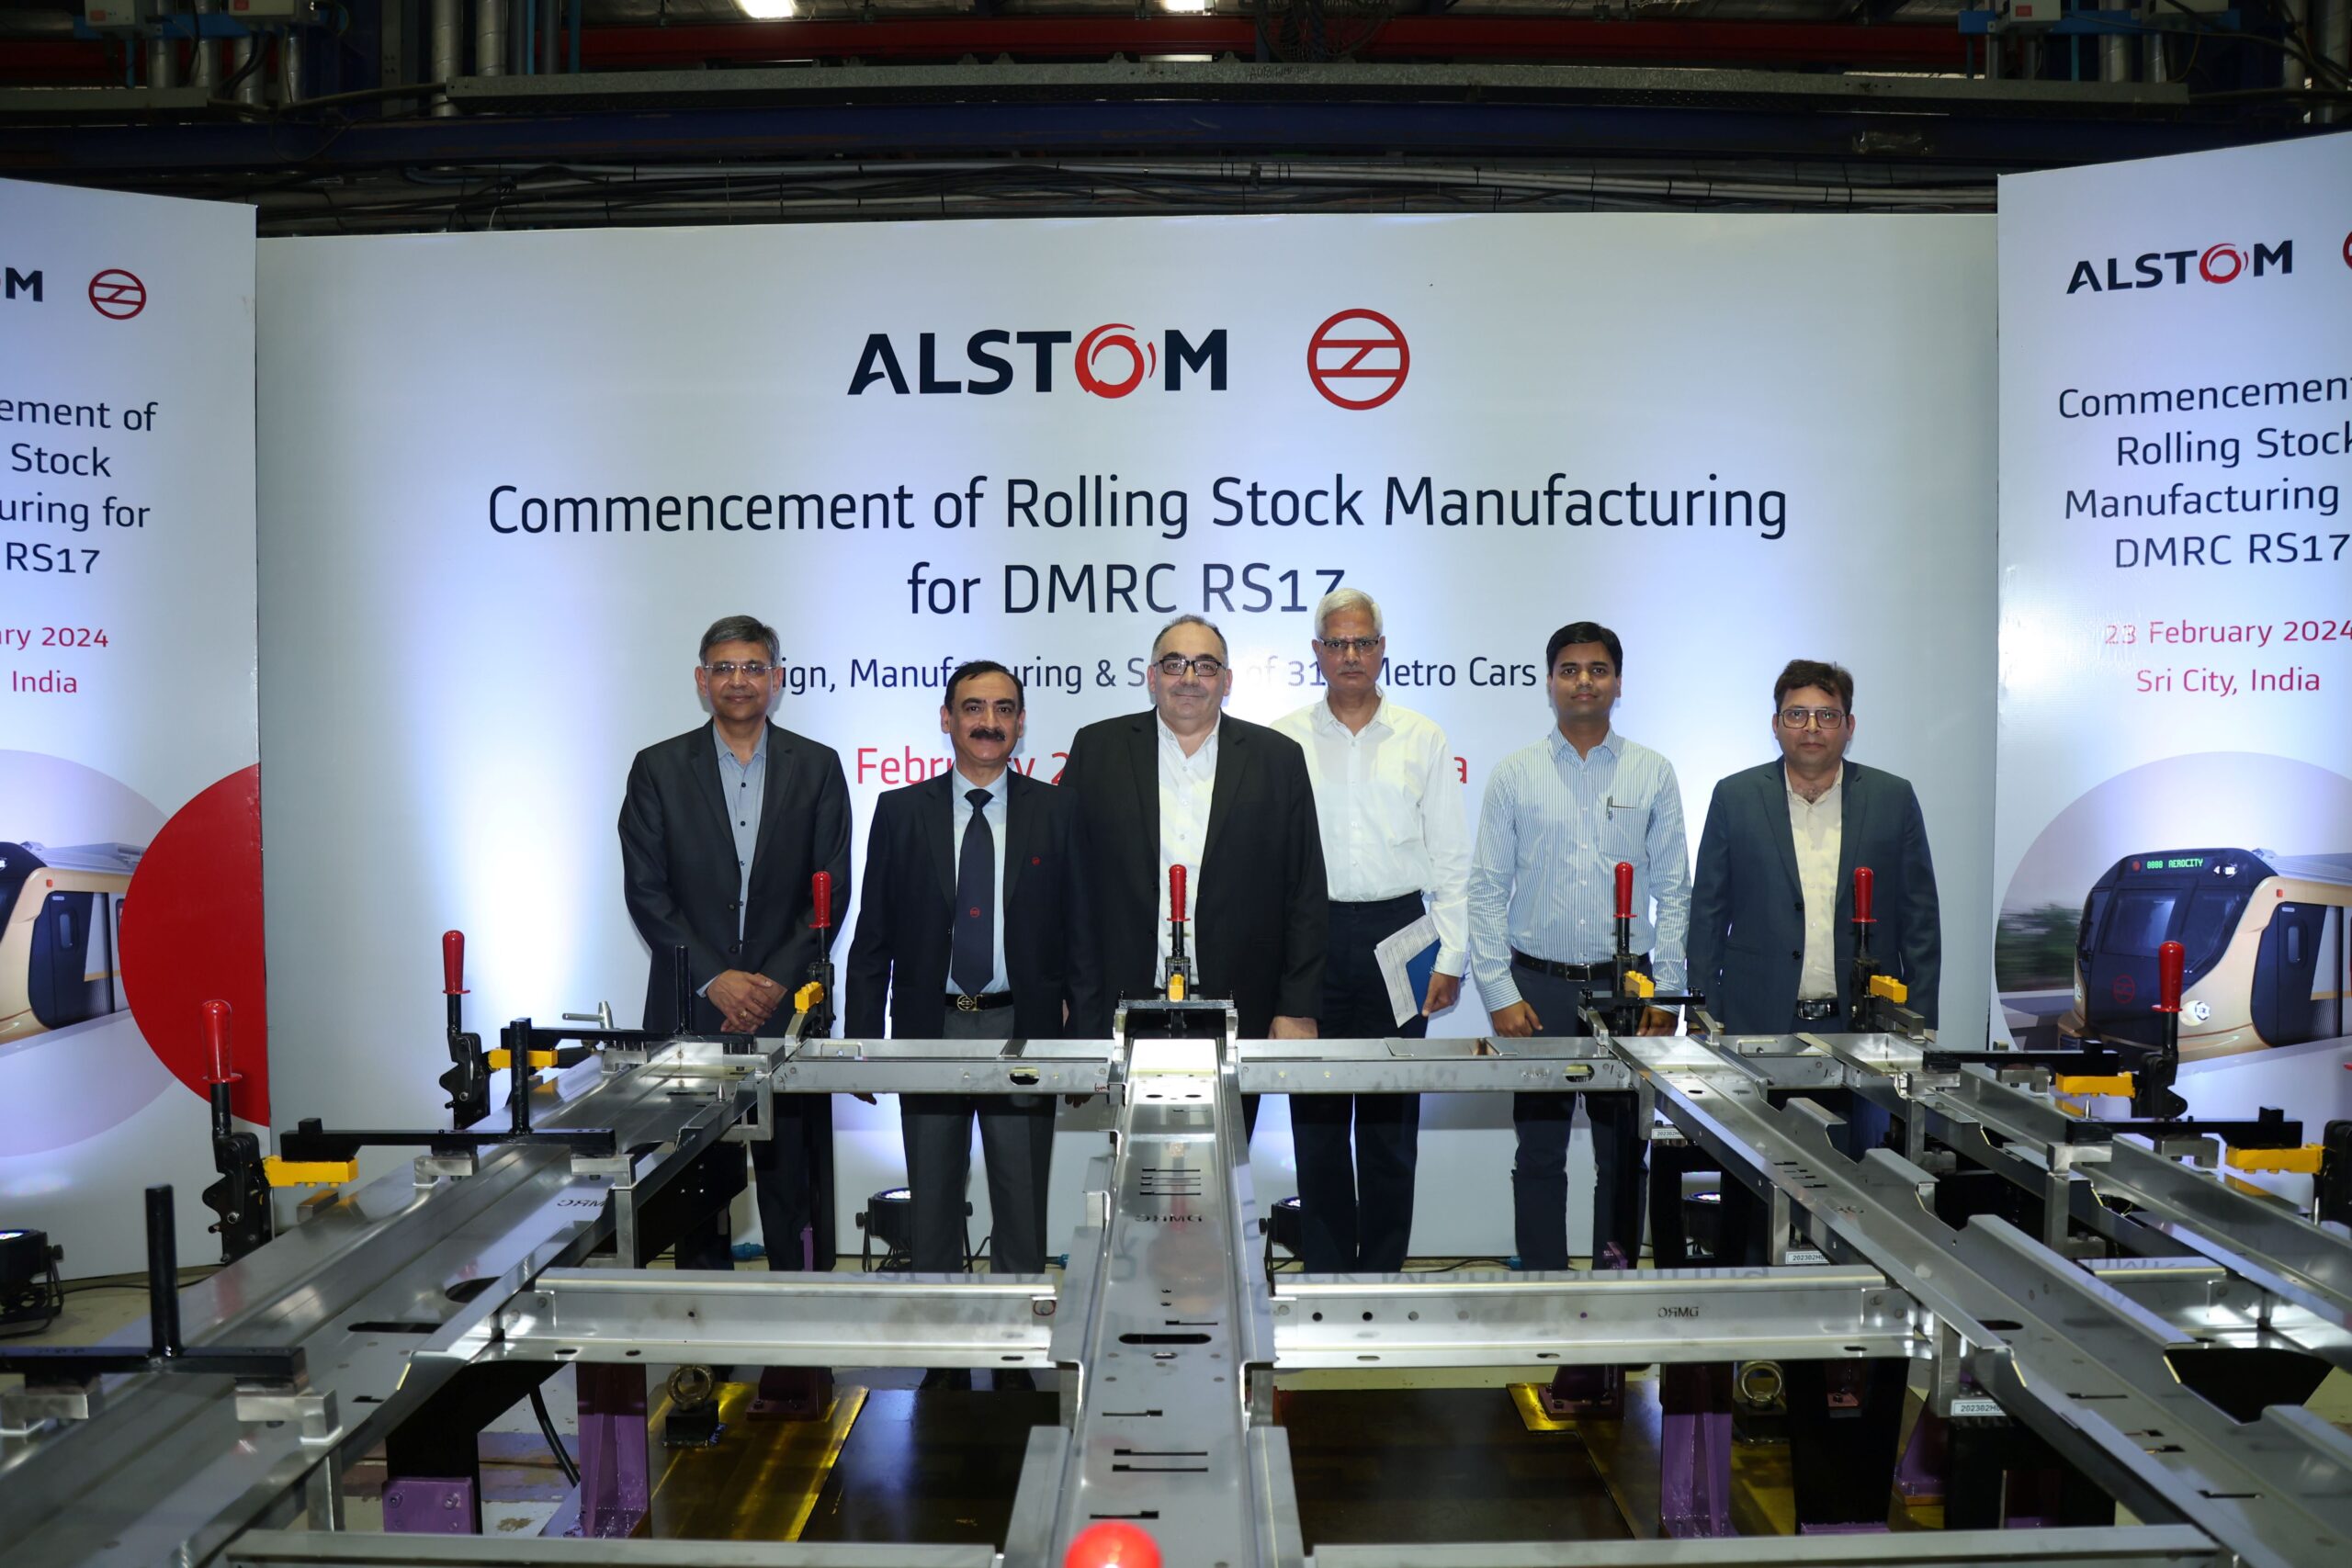 The production was commenced at a commemorative ceremony led by leaders from Delhi Metro Rail Corporation and Alstom India